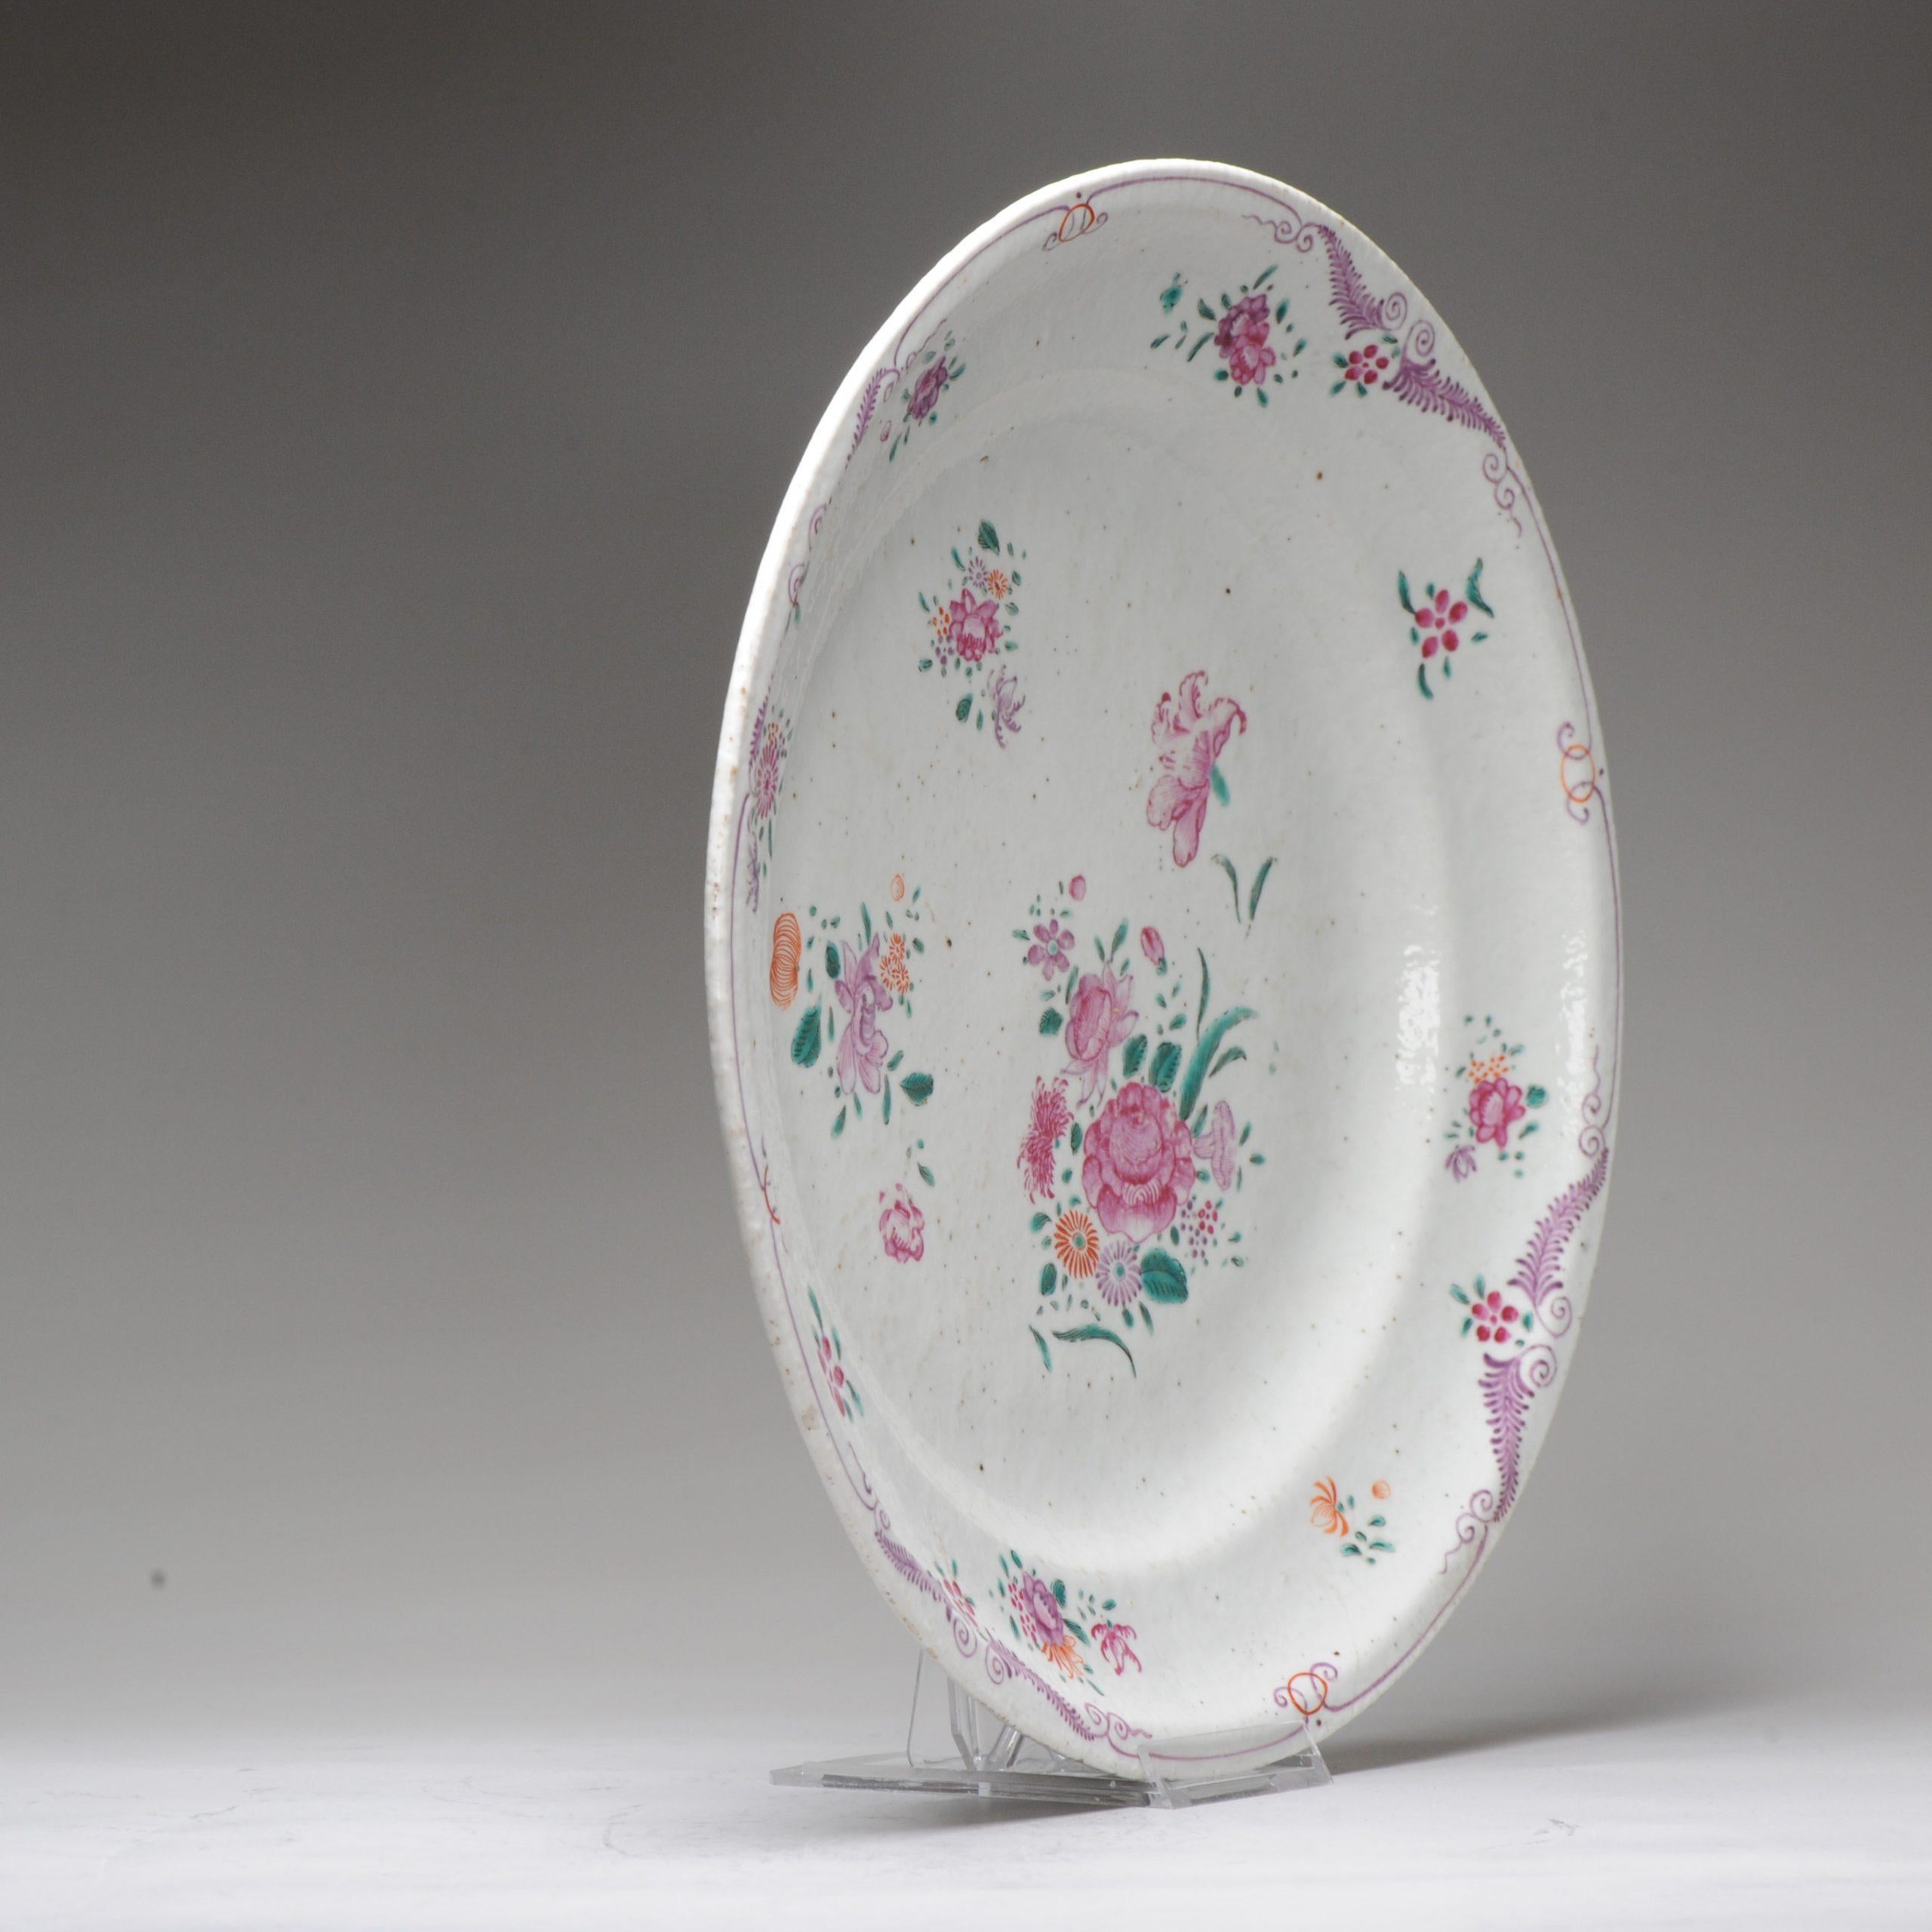 Lovely 18th century dish with a nice and high quality scene of Flowers.

Additional information:
Type: Plates
Region of Origin: China
Period: 18th century Qing (1661 - 1912)
Condition: 1 star hairline to rim.
Dimension: Ø 23.5 x 4.7 H cm